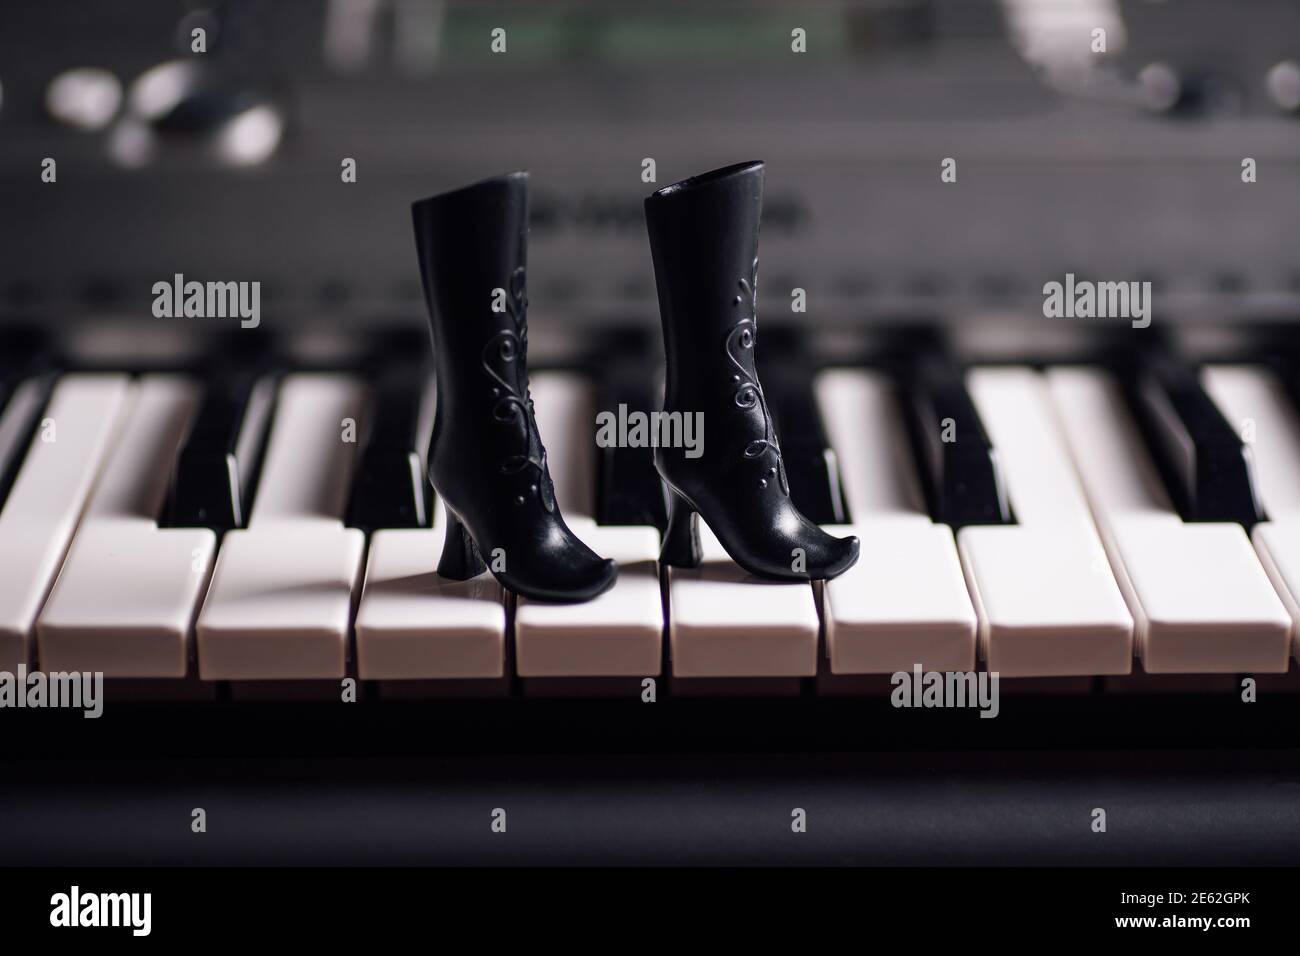 close-up black toy rubber boots with high heels on piano keys Stock Photo